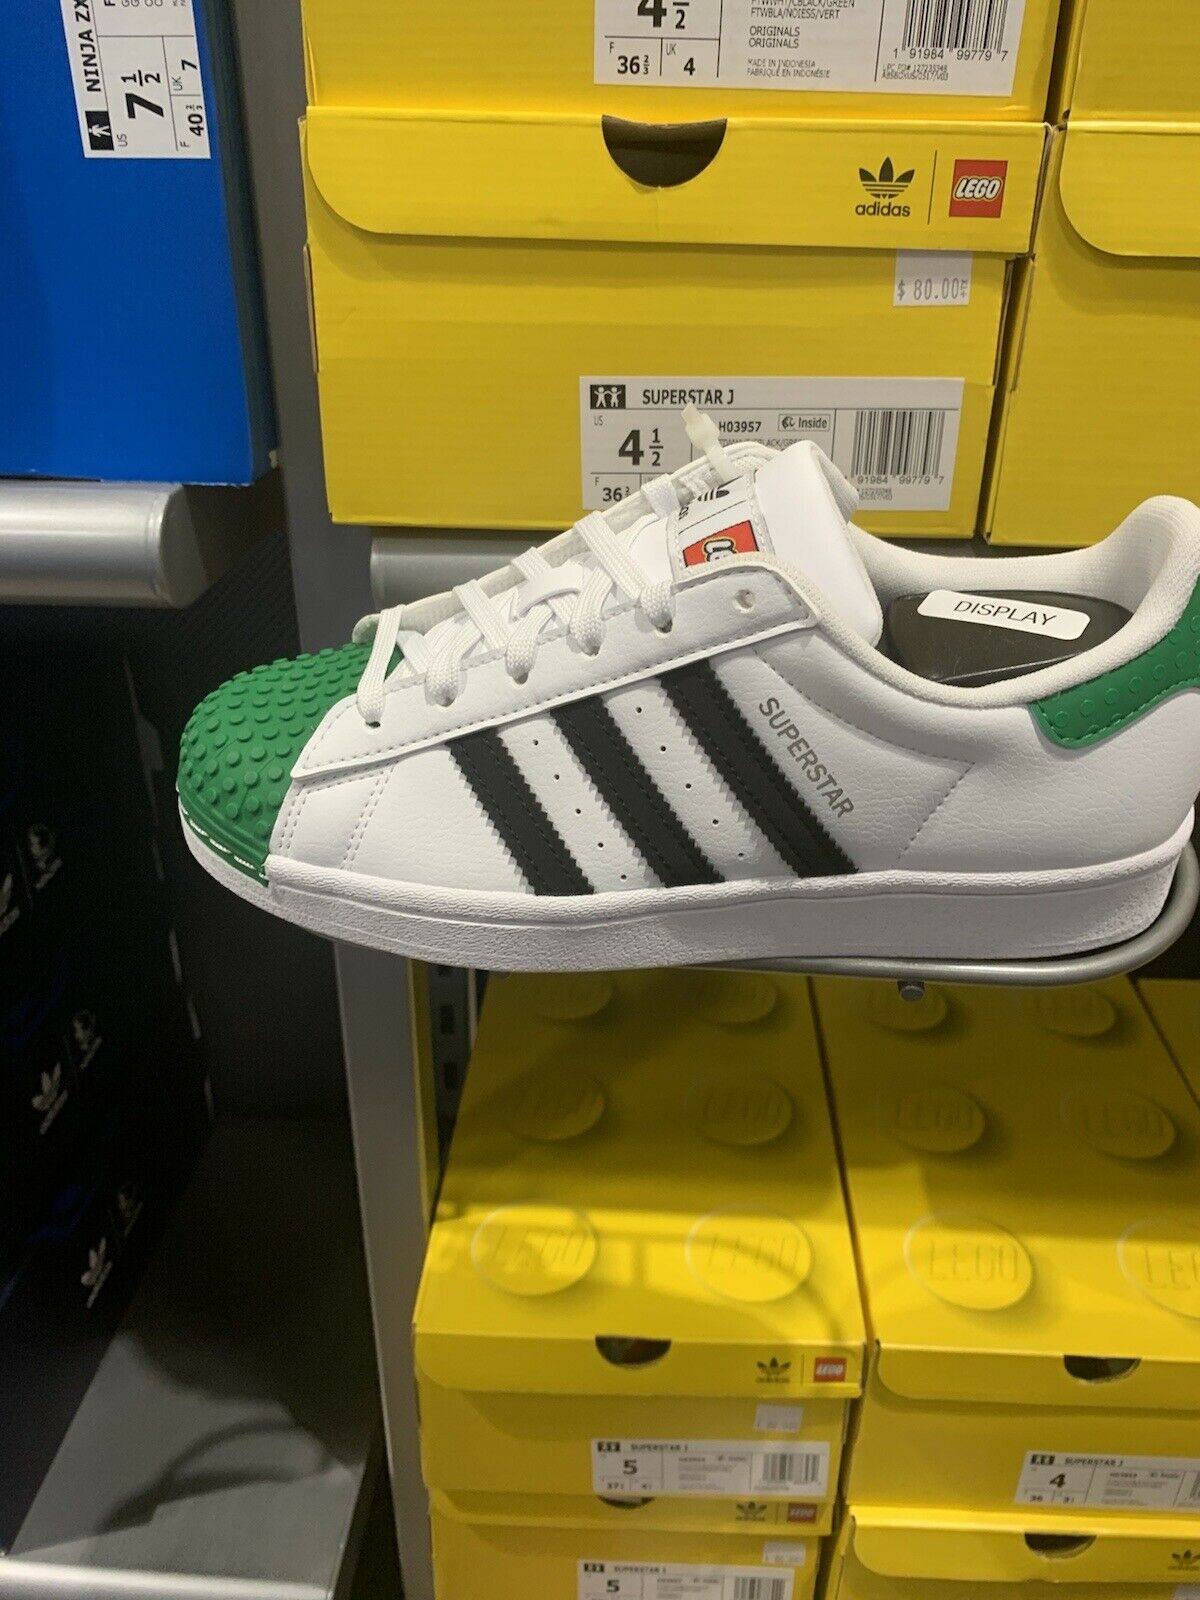 Superstar J Adidas Shoes. Lego Edition. Boys Size 5. White/Black/Geeen